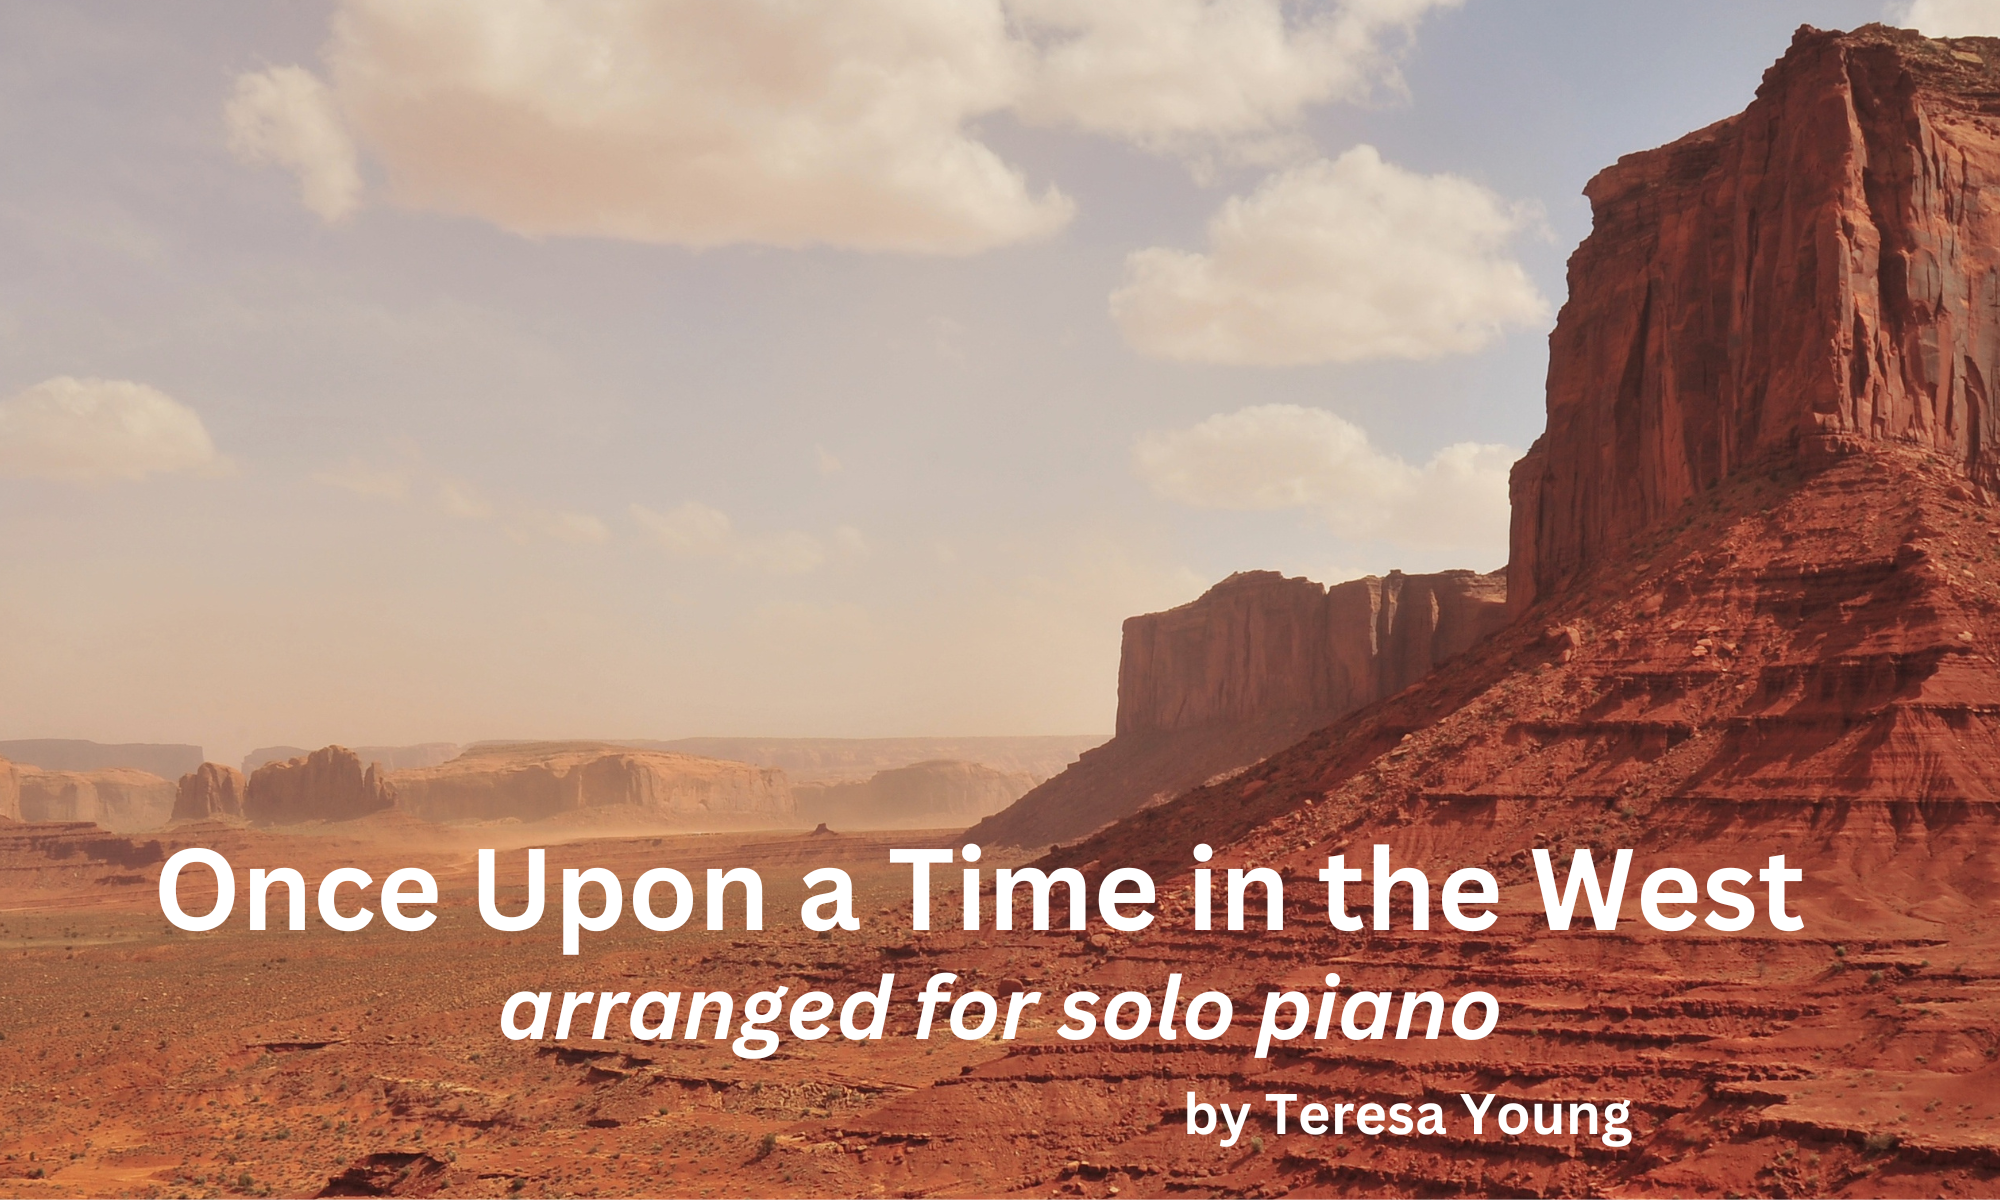 Once Upon a Time in the West, for solo piano, arranged by Teresa Young